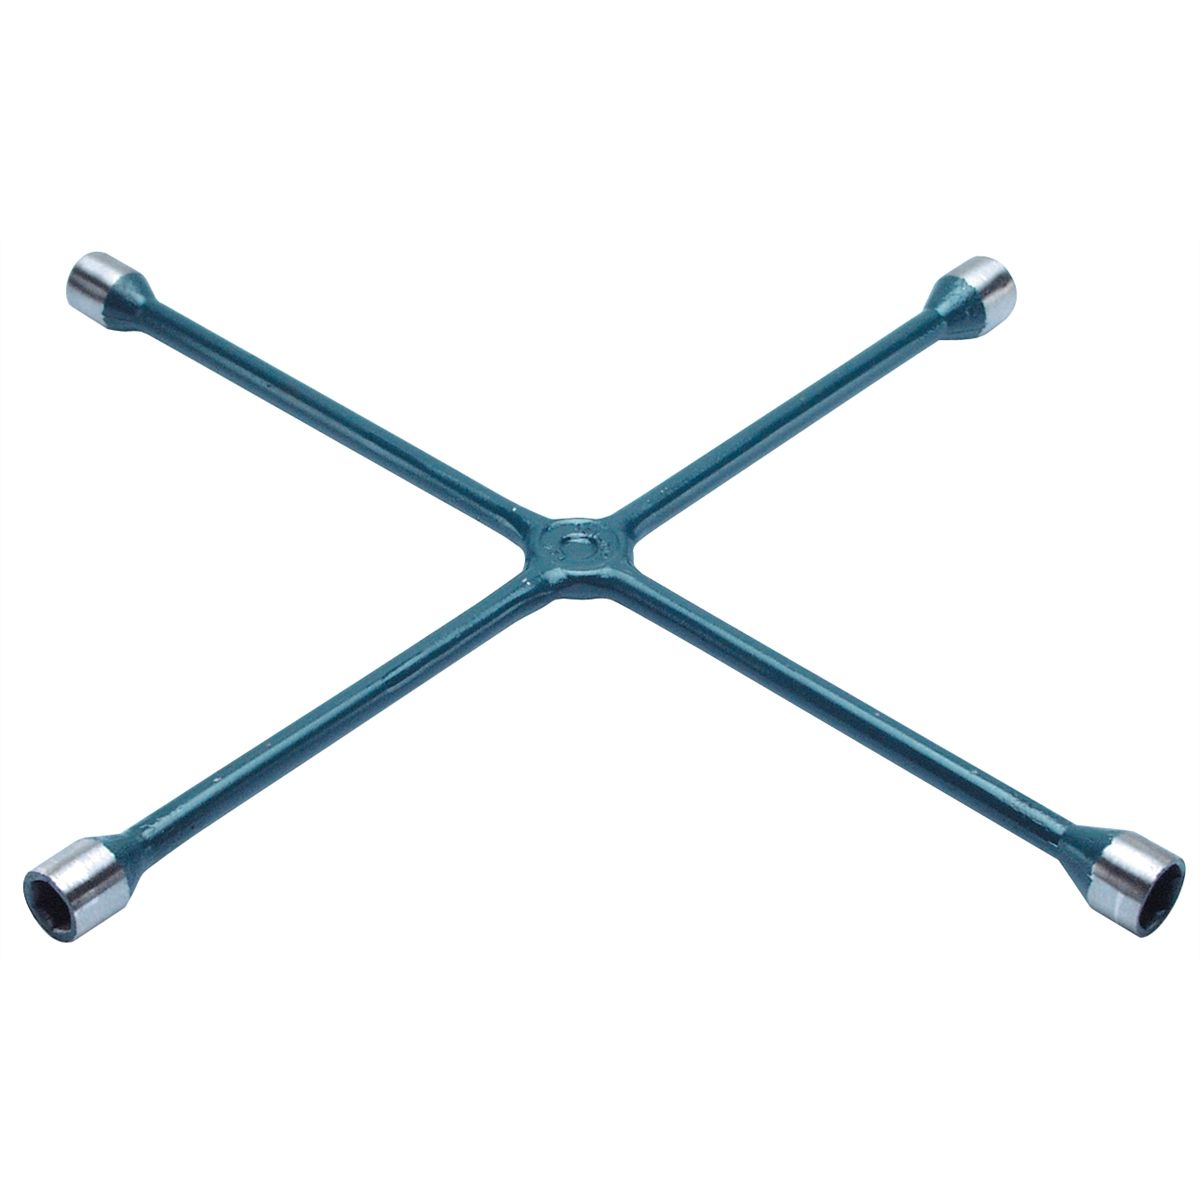 Four-Way Professional Metric Lug Wrench T56 - 20 In